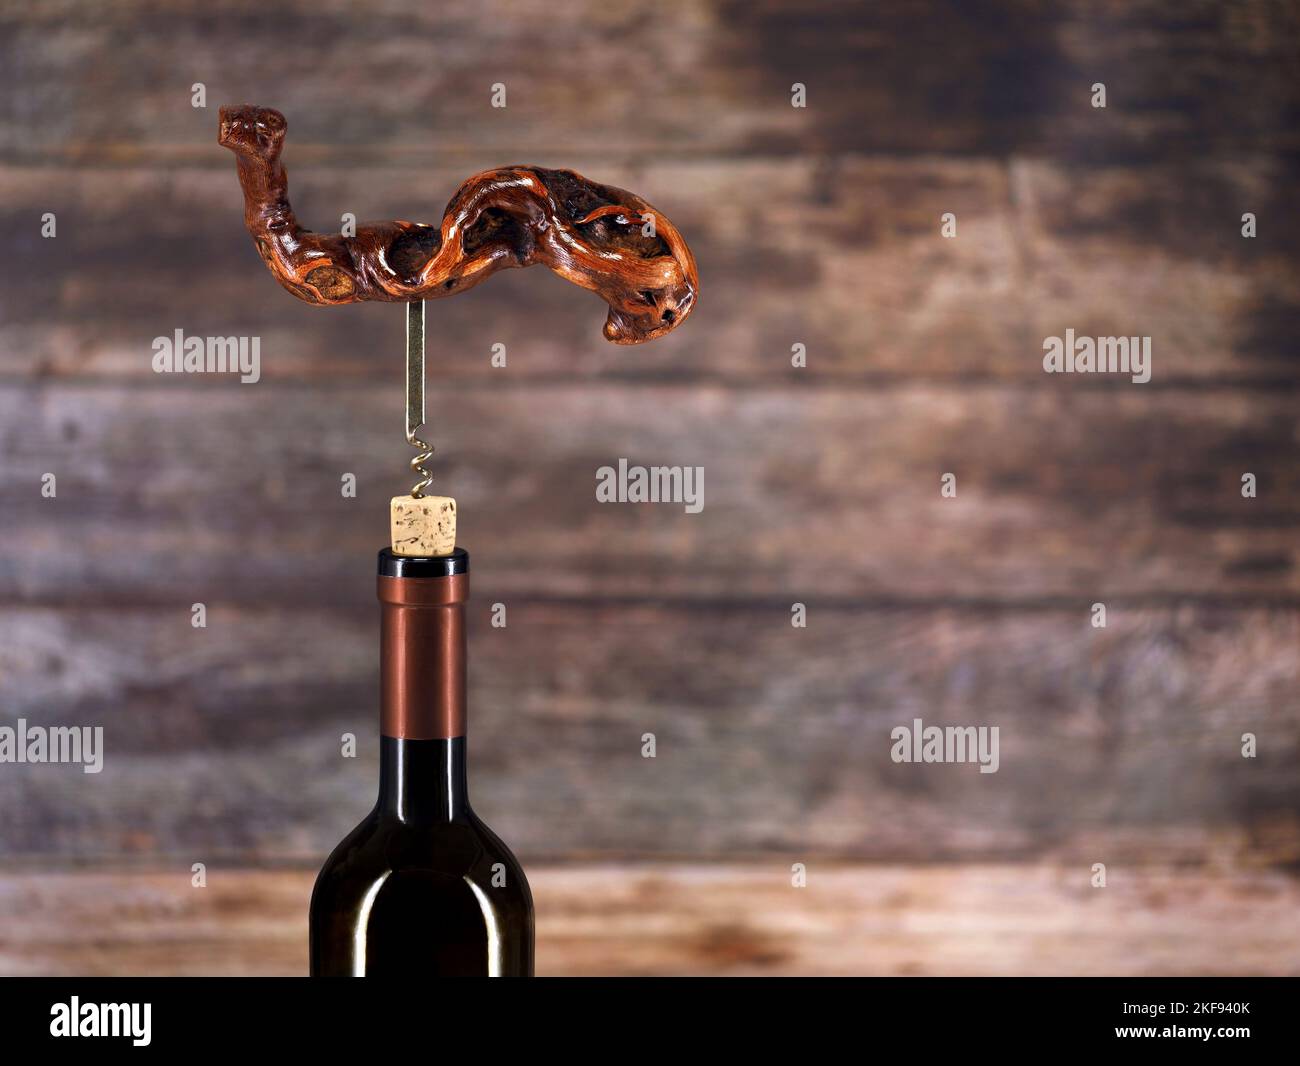 Bottle of wine with old vintage wooden corkscrew on wooden background with copy space Stock Photo